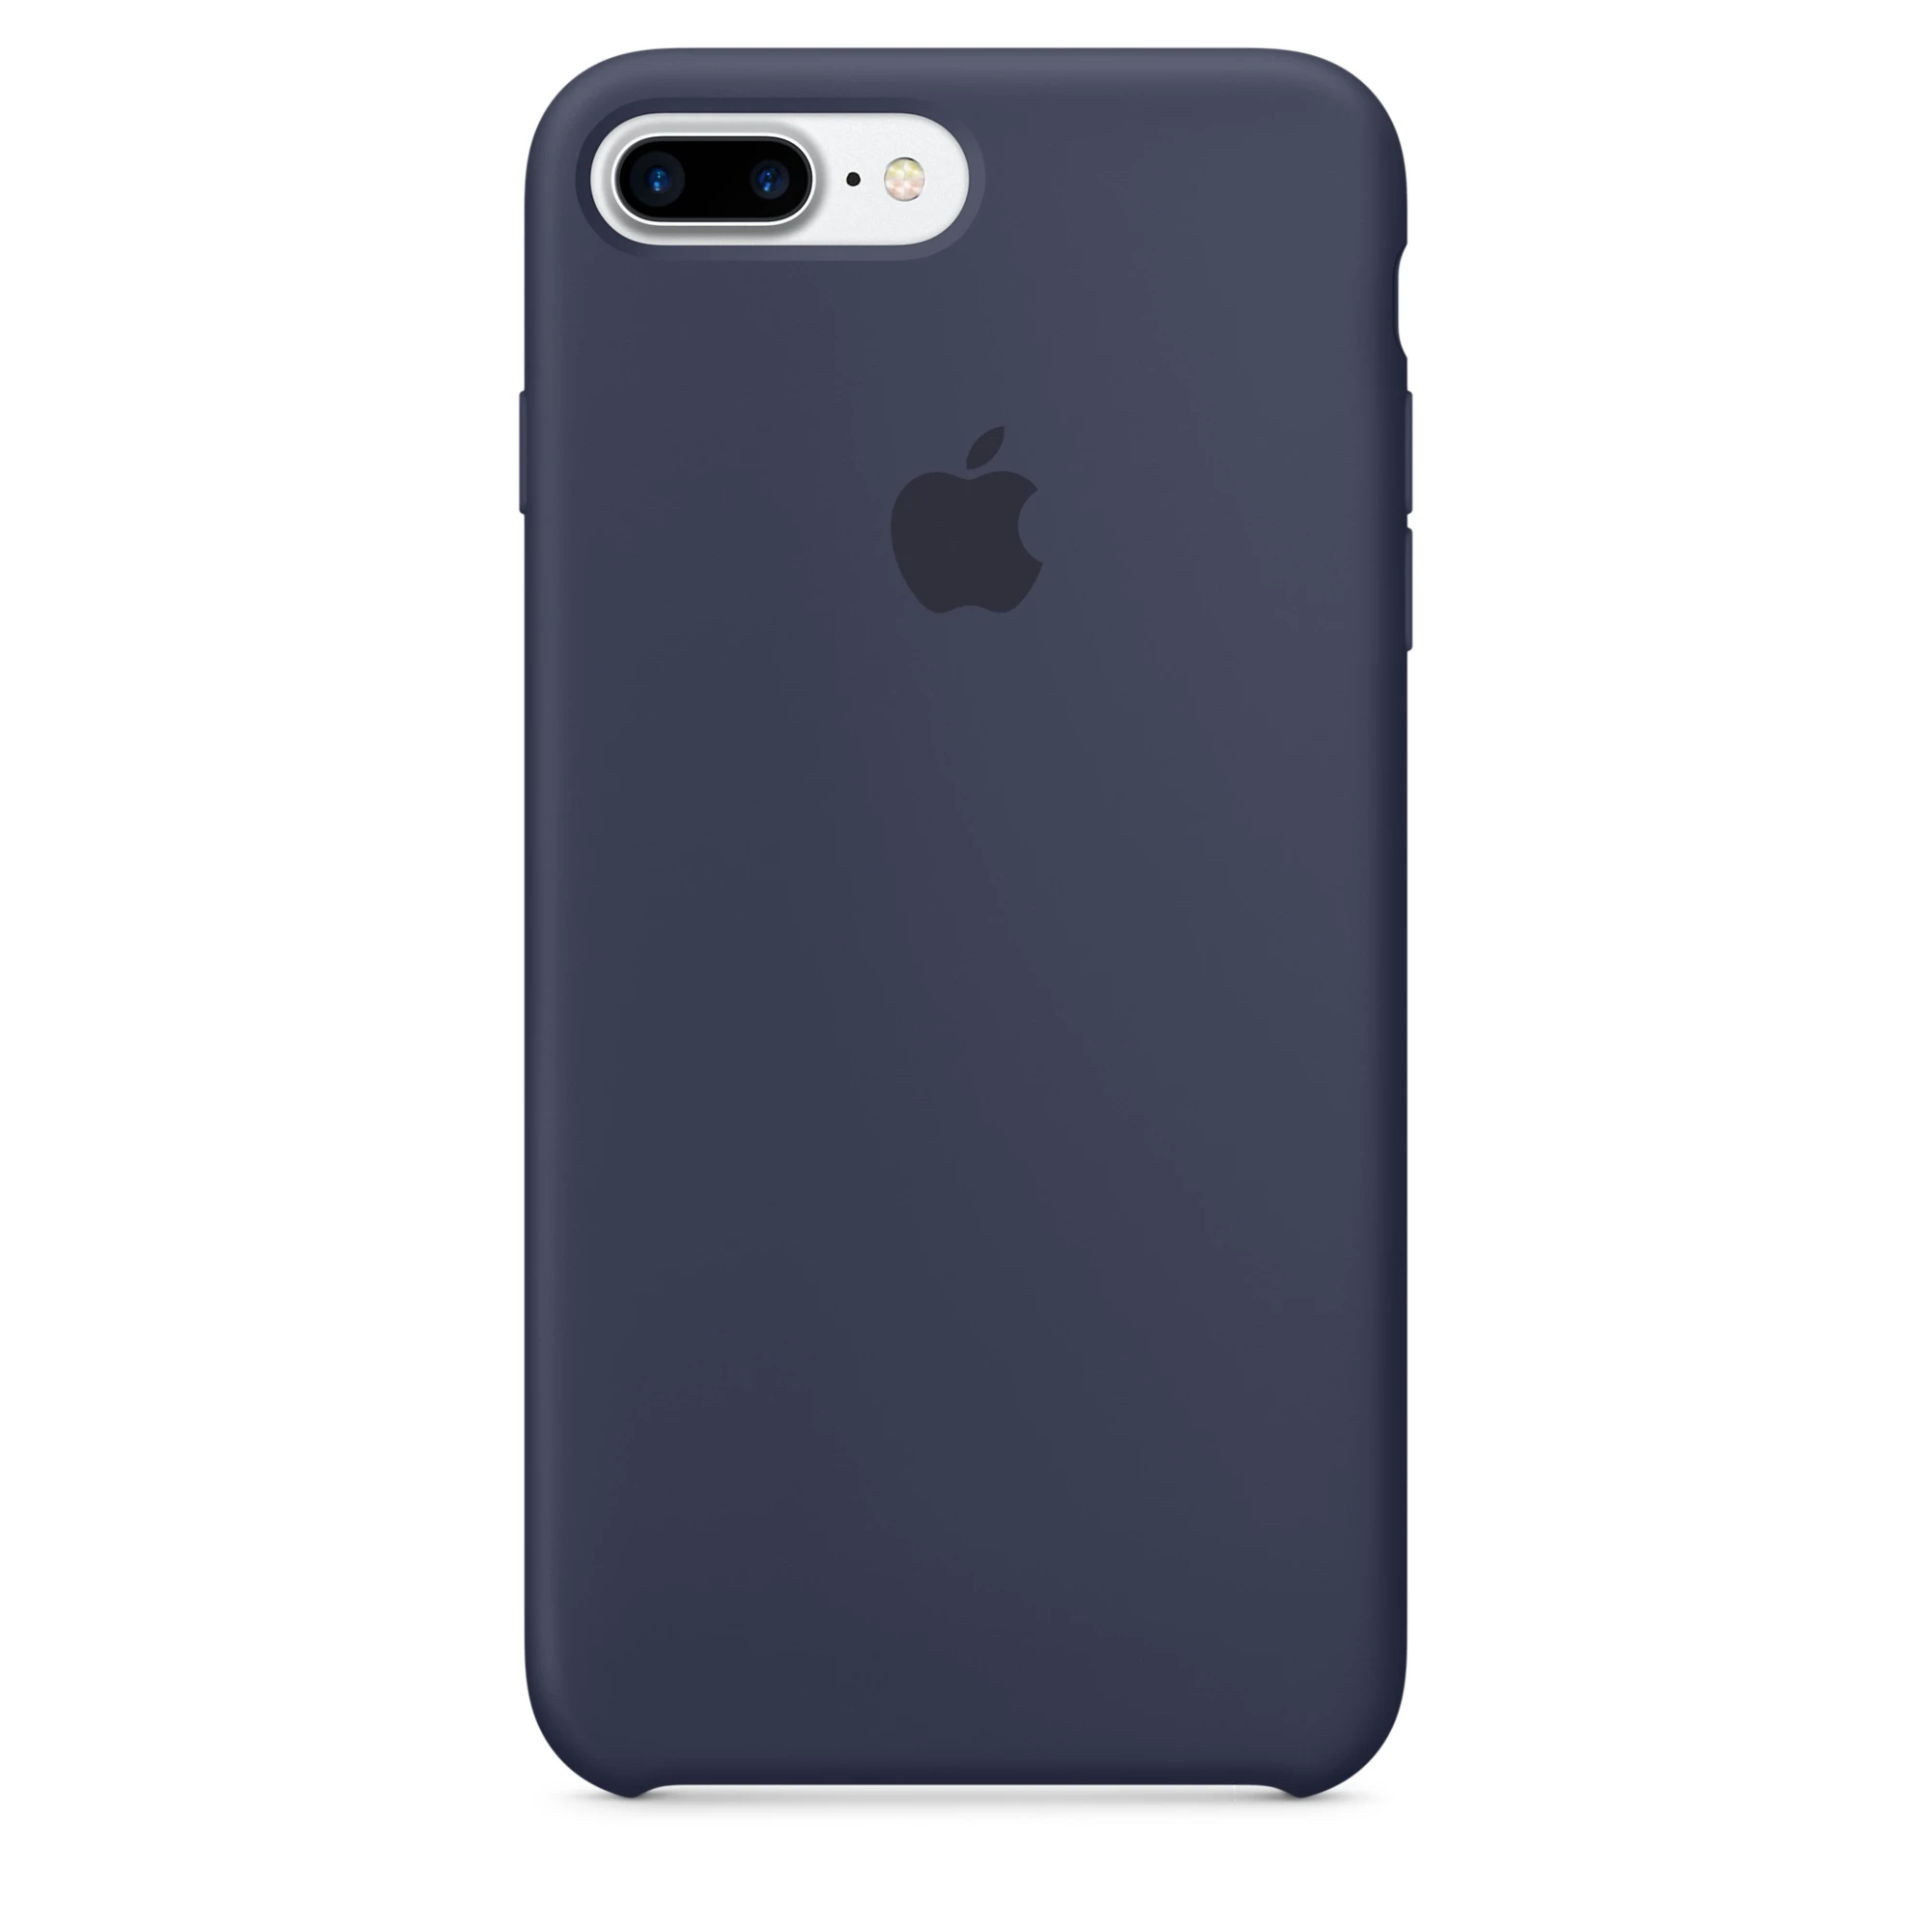 Apple iPhone 7/8 Plus Silicone Case LUX COPY - Midnight Blue (MMQU2, MQGY2)